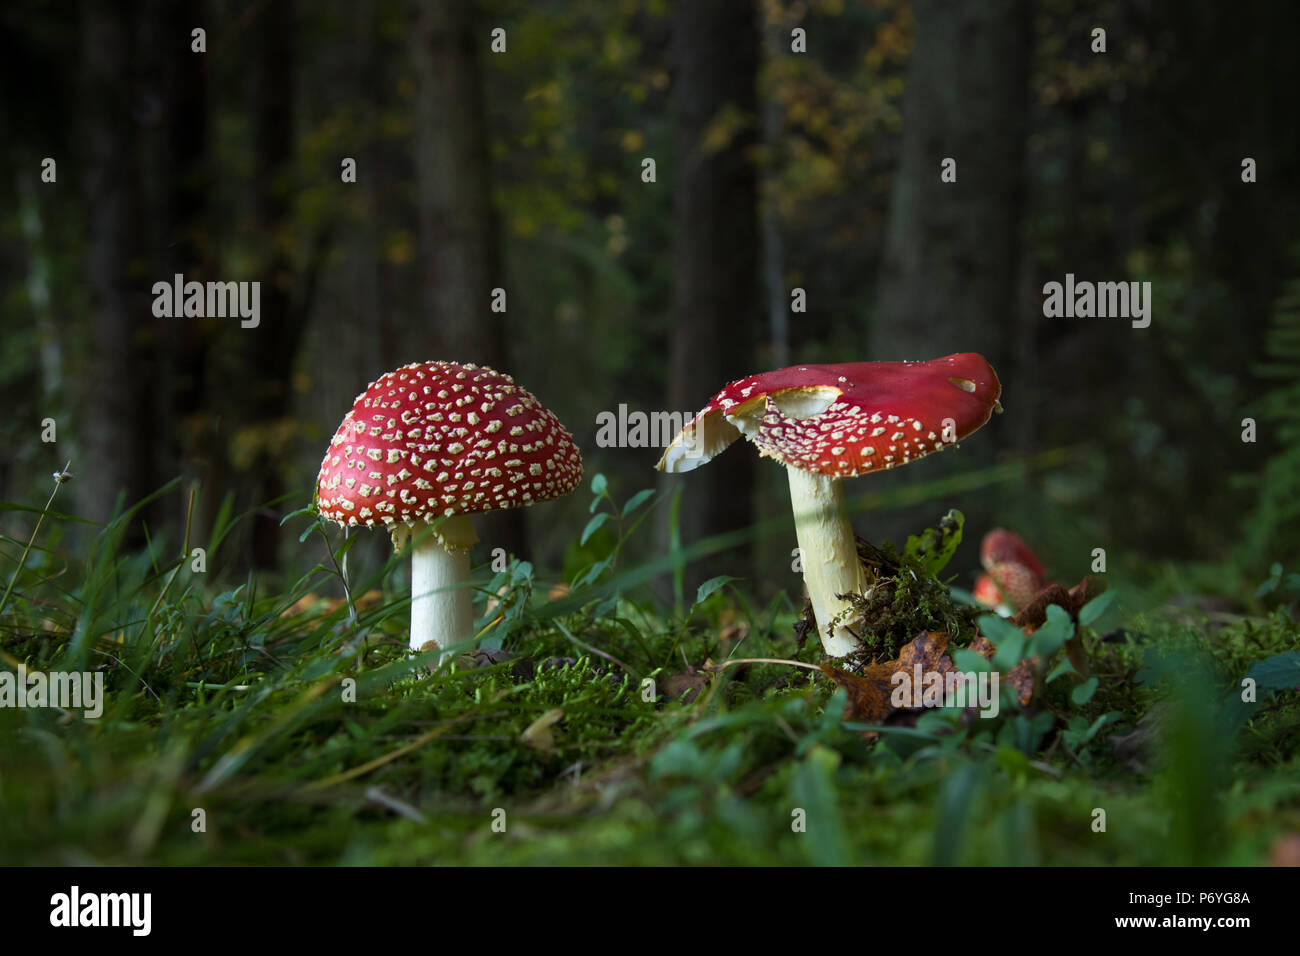 Two fly agaric mushrooms on green forest floor, one of them has been partially eaten, Finland, Scandinavia Stock Photo